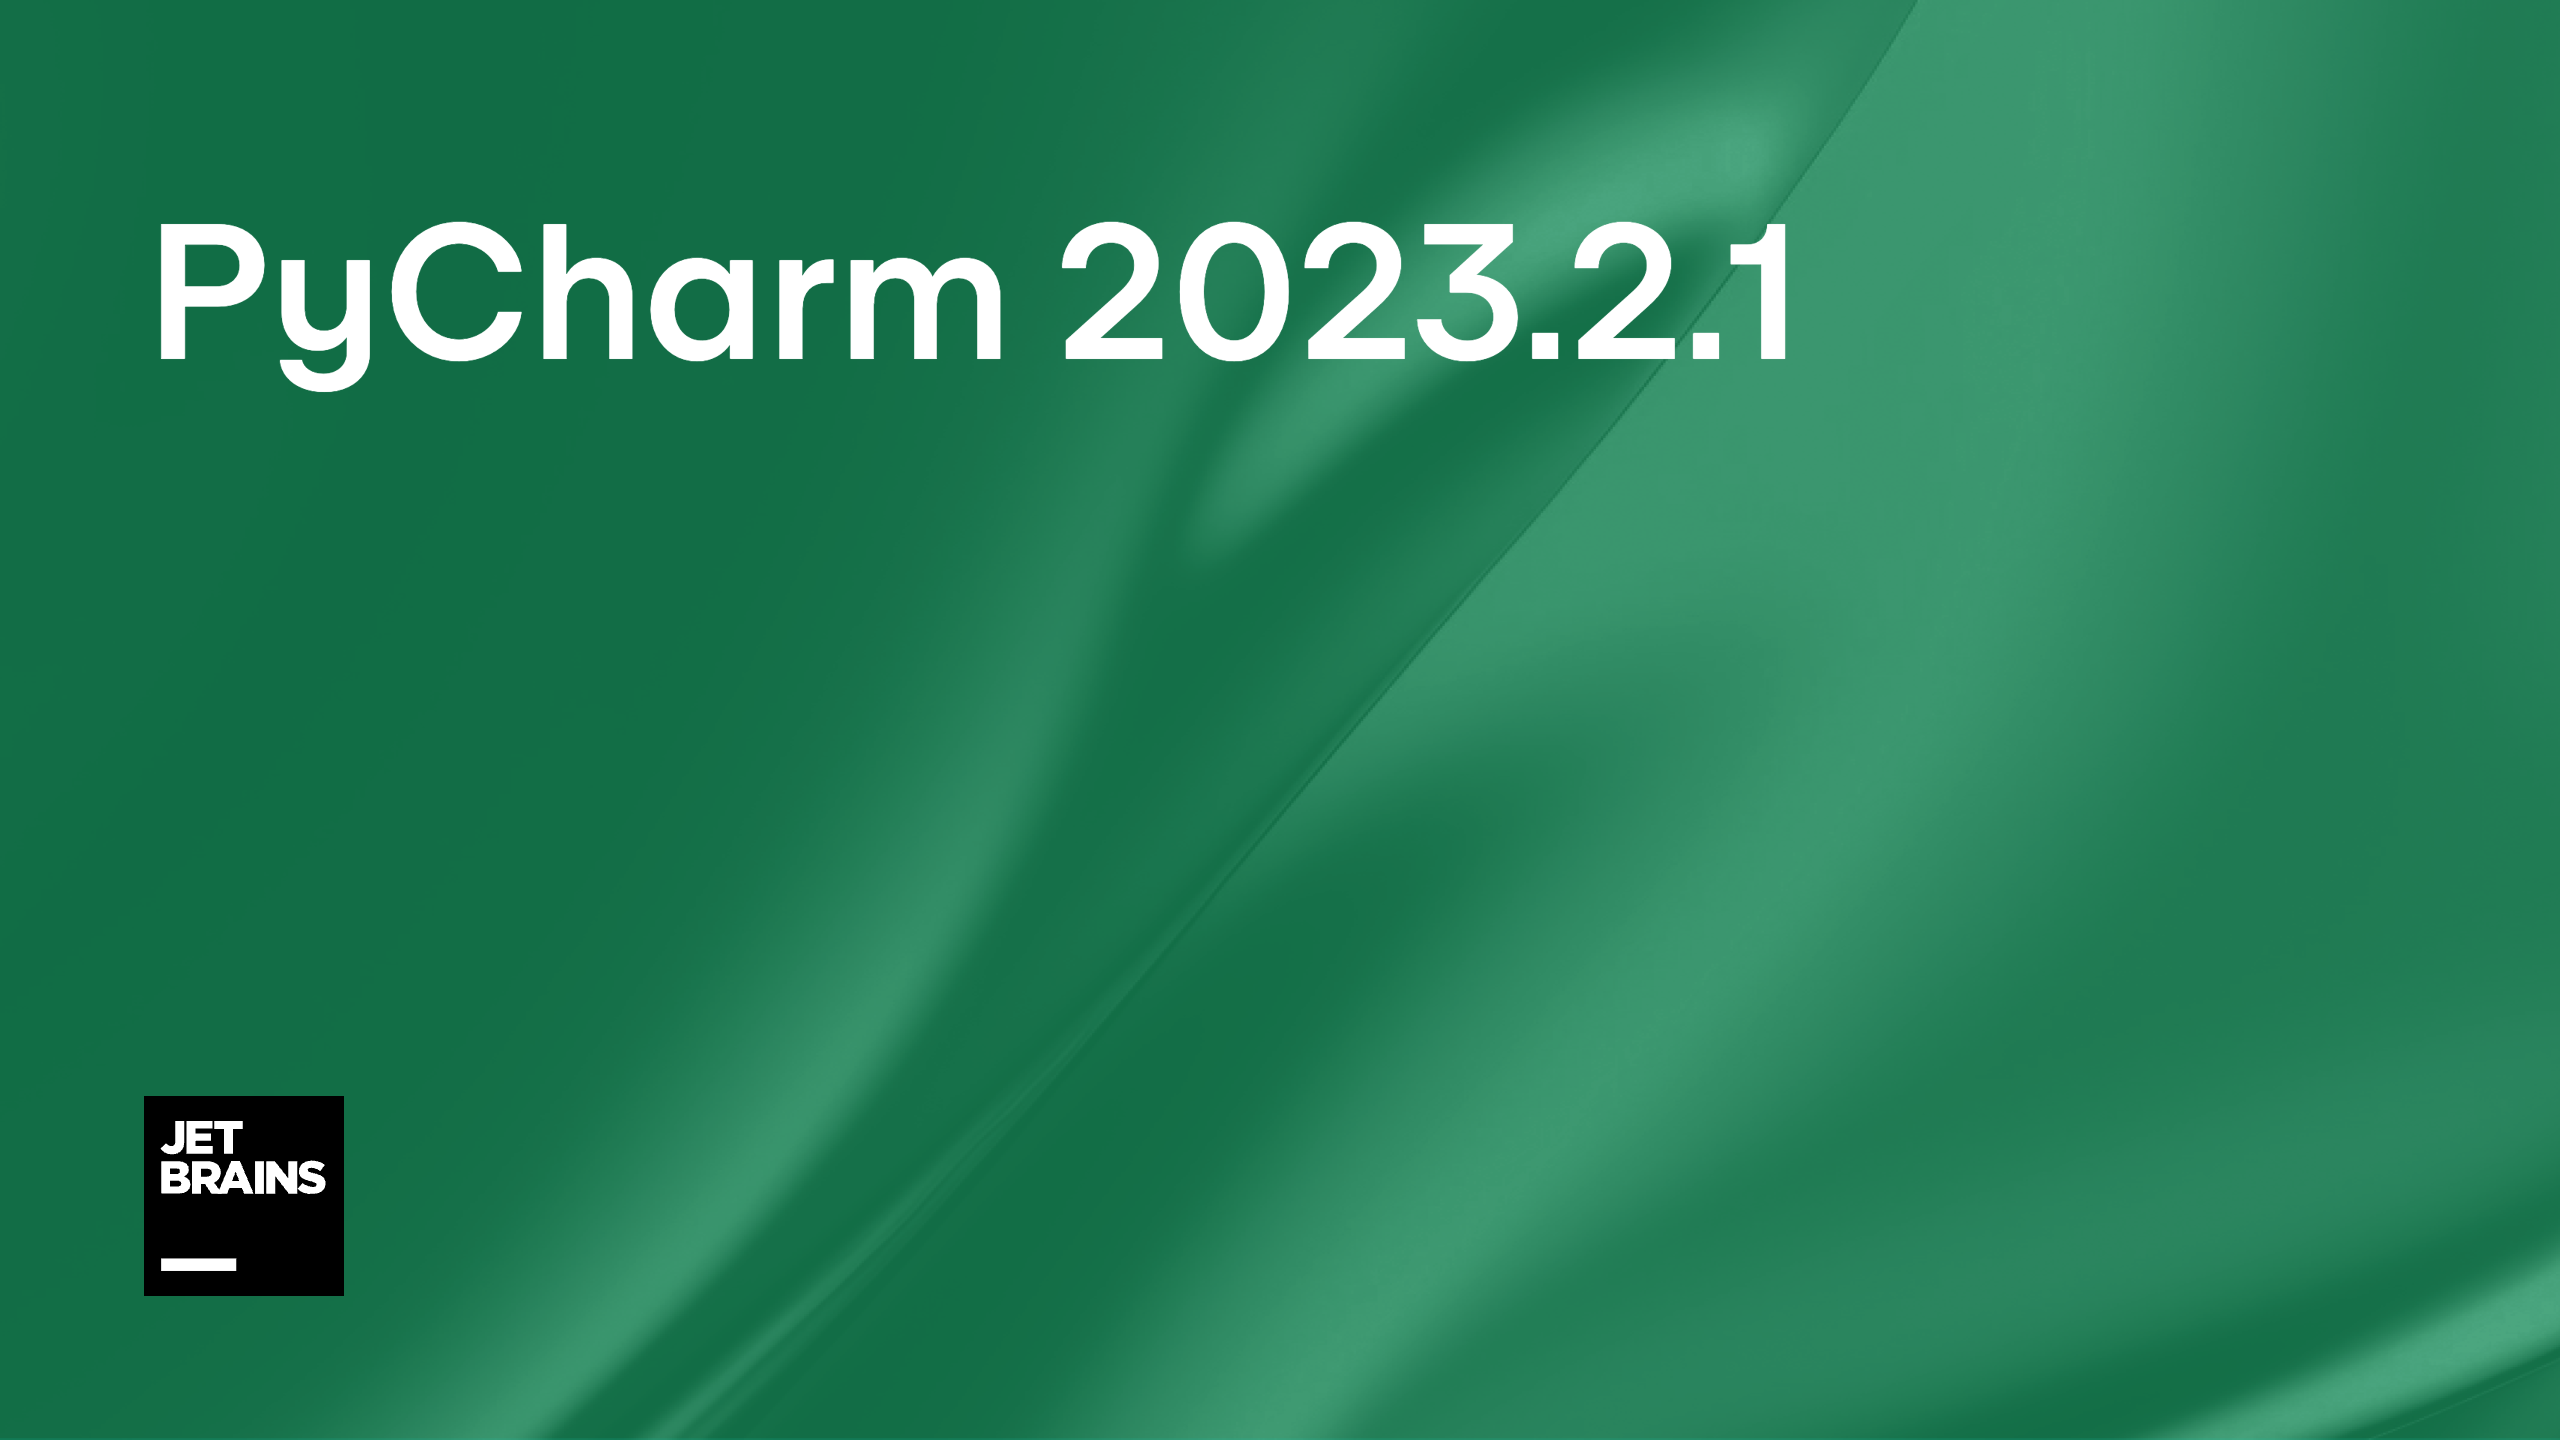 What's New in PyCharm 2023.3.4